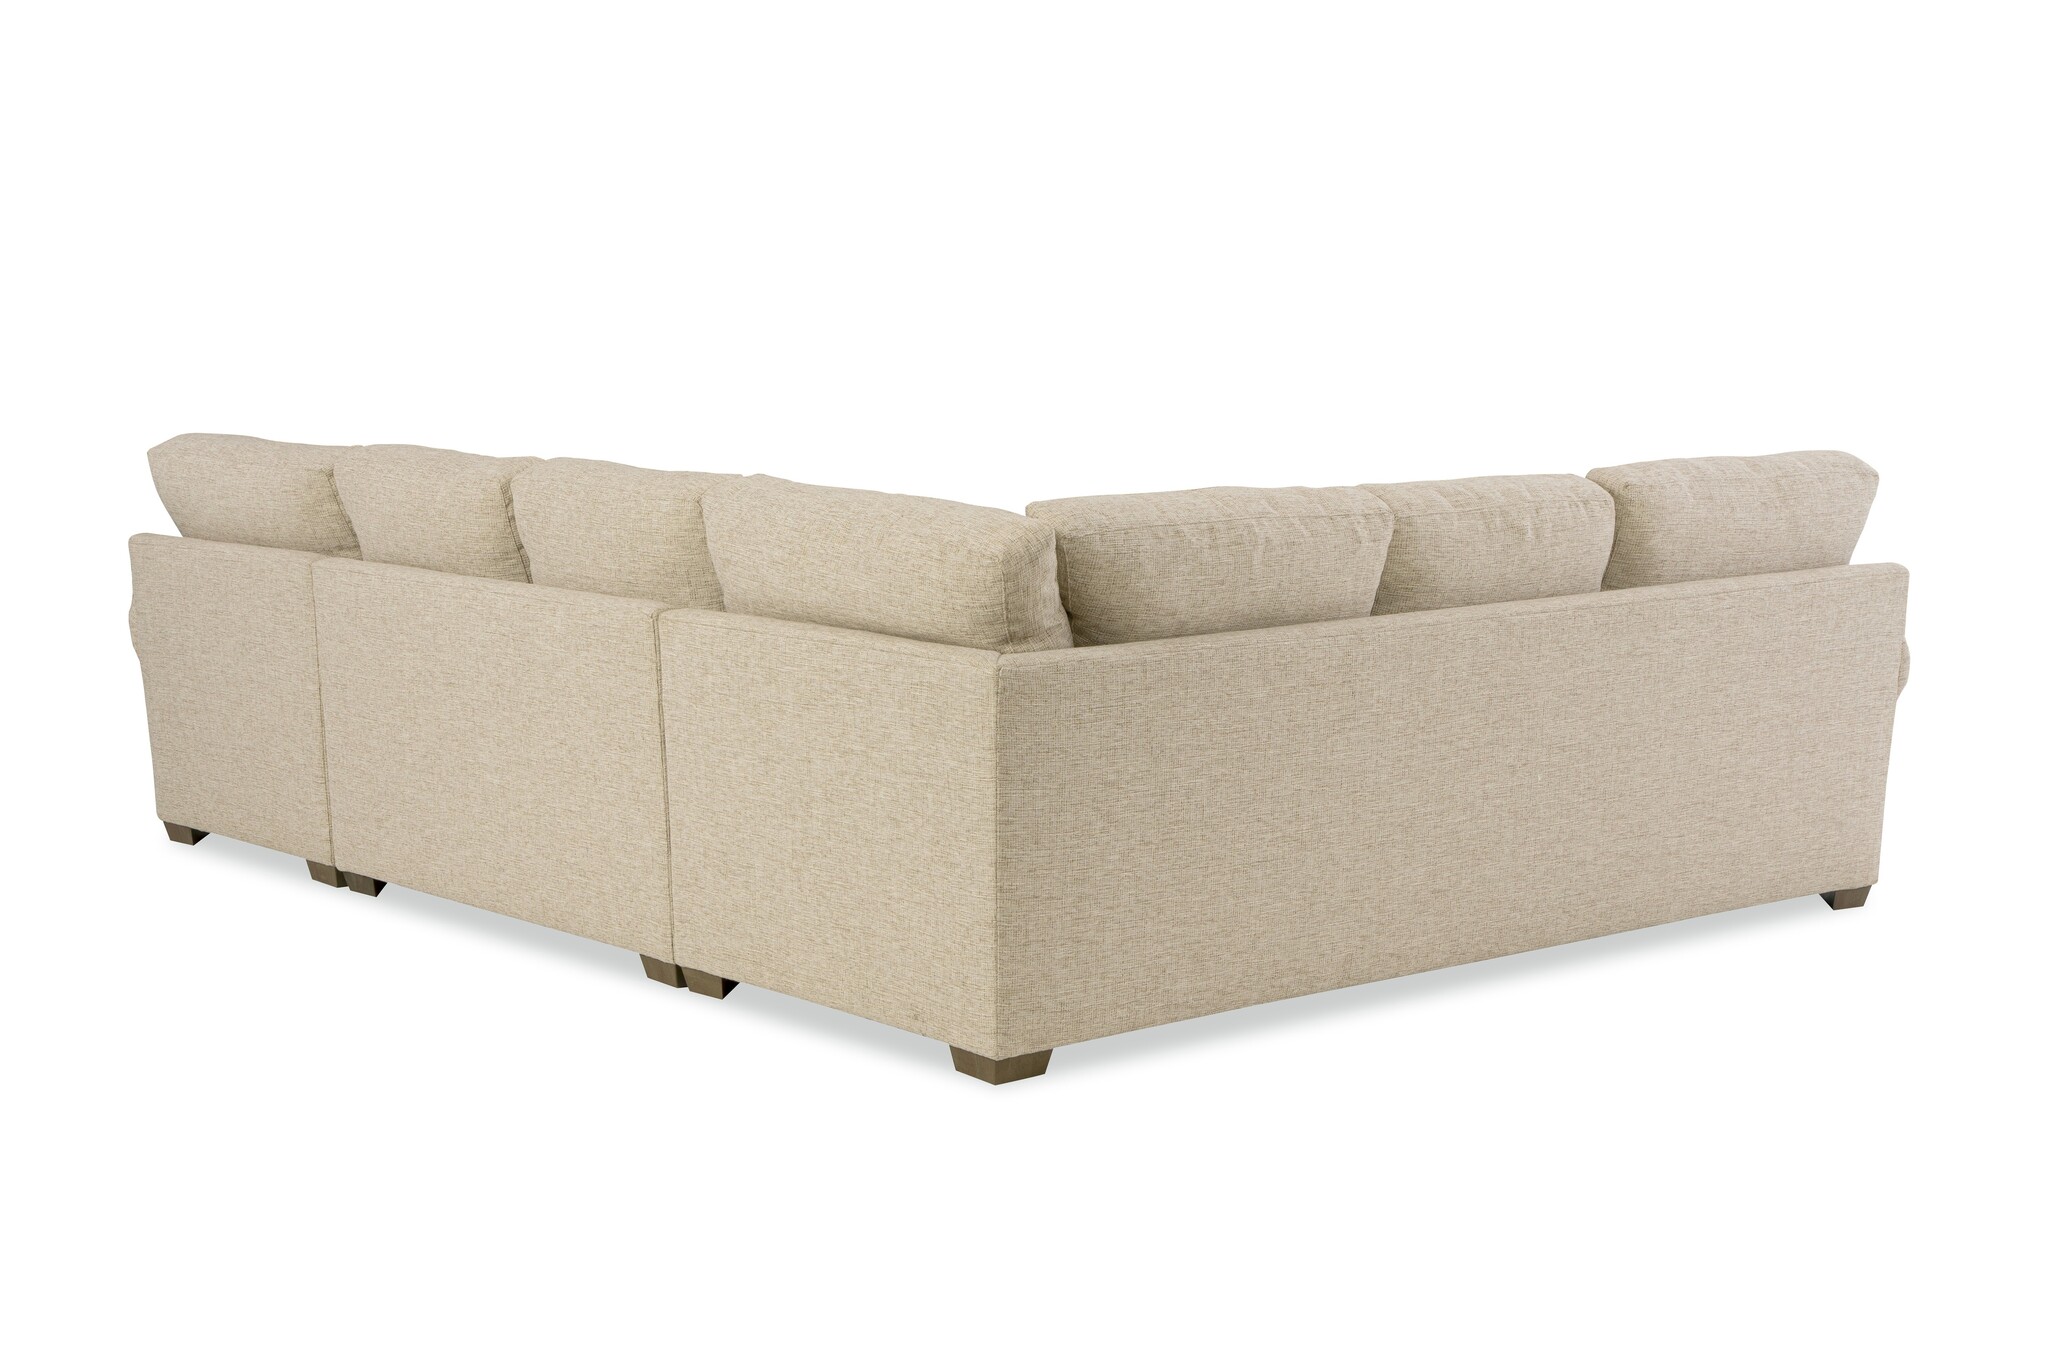 Craftmaster Furniture 7236 Sectional